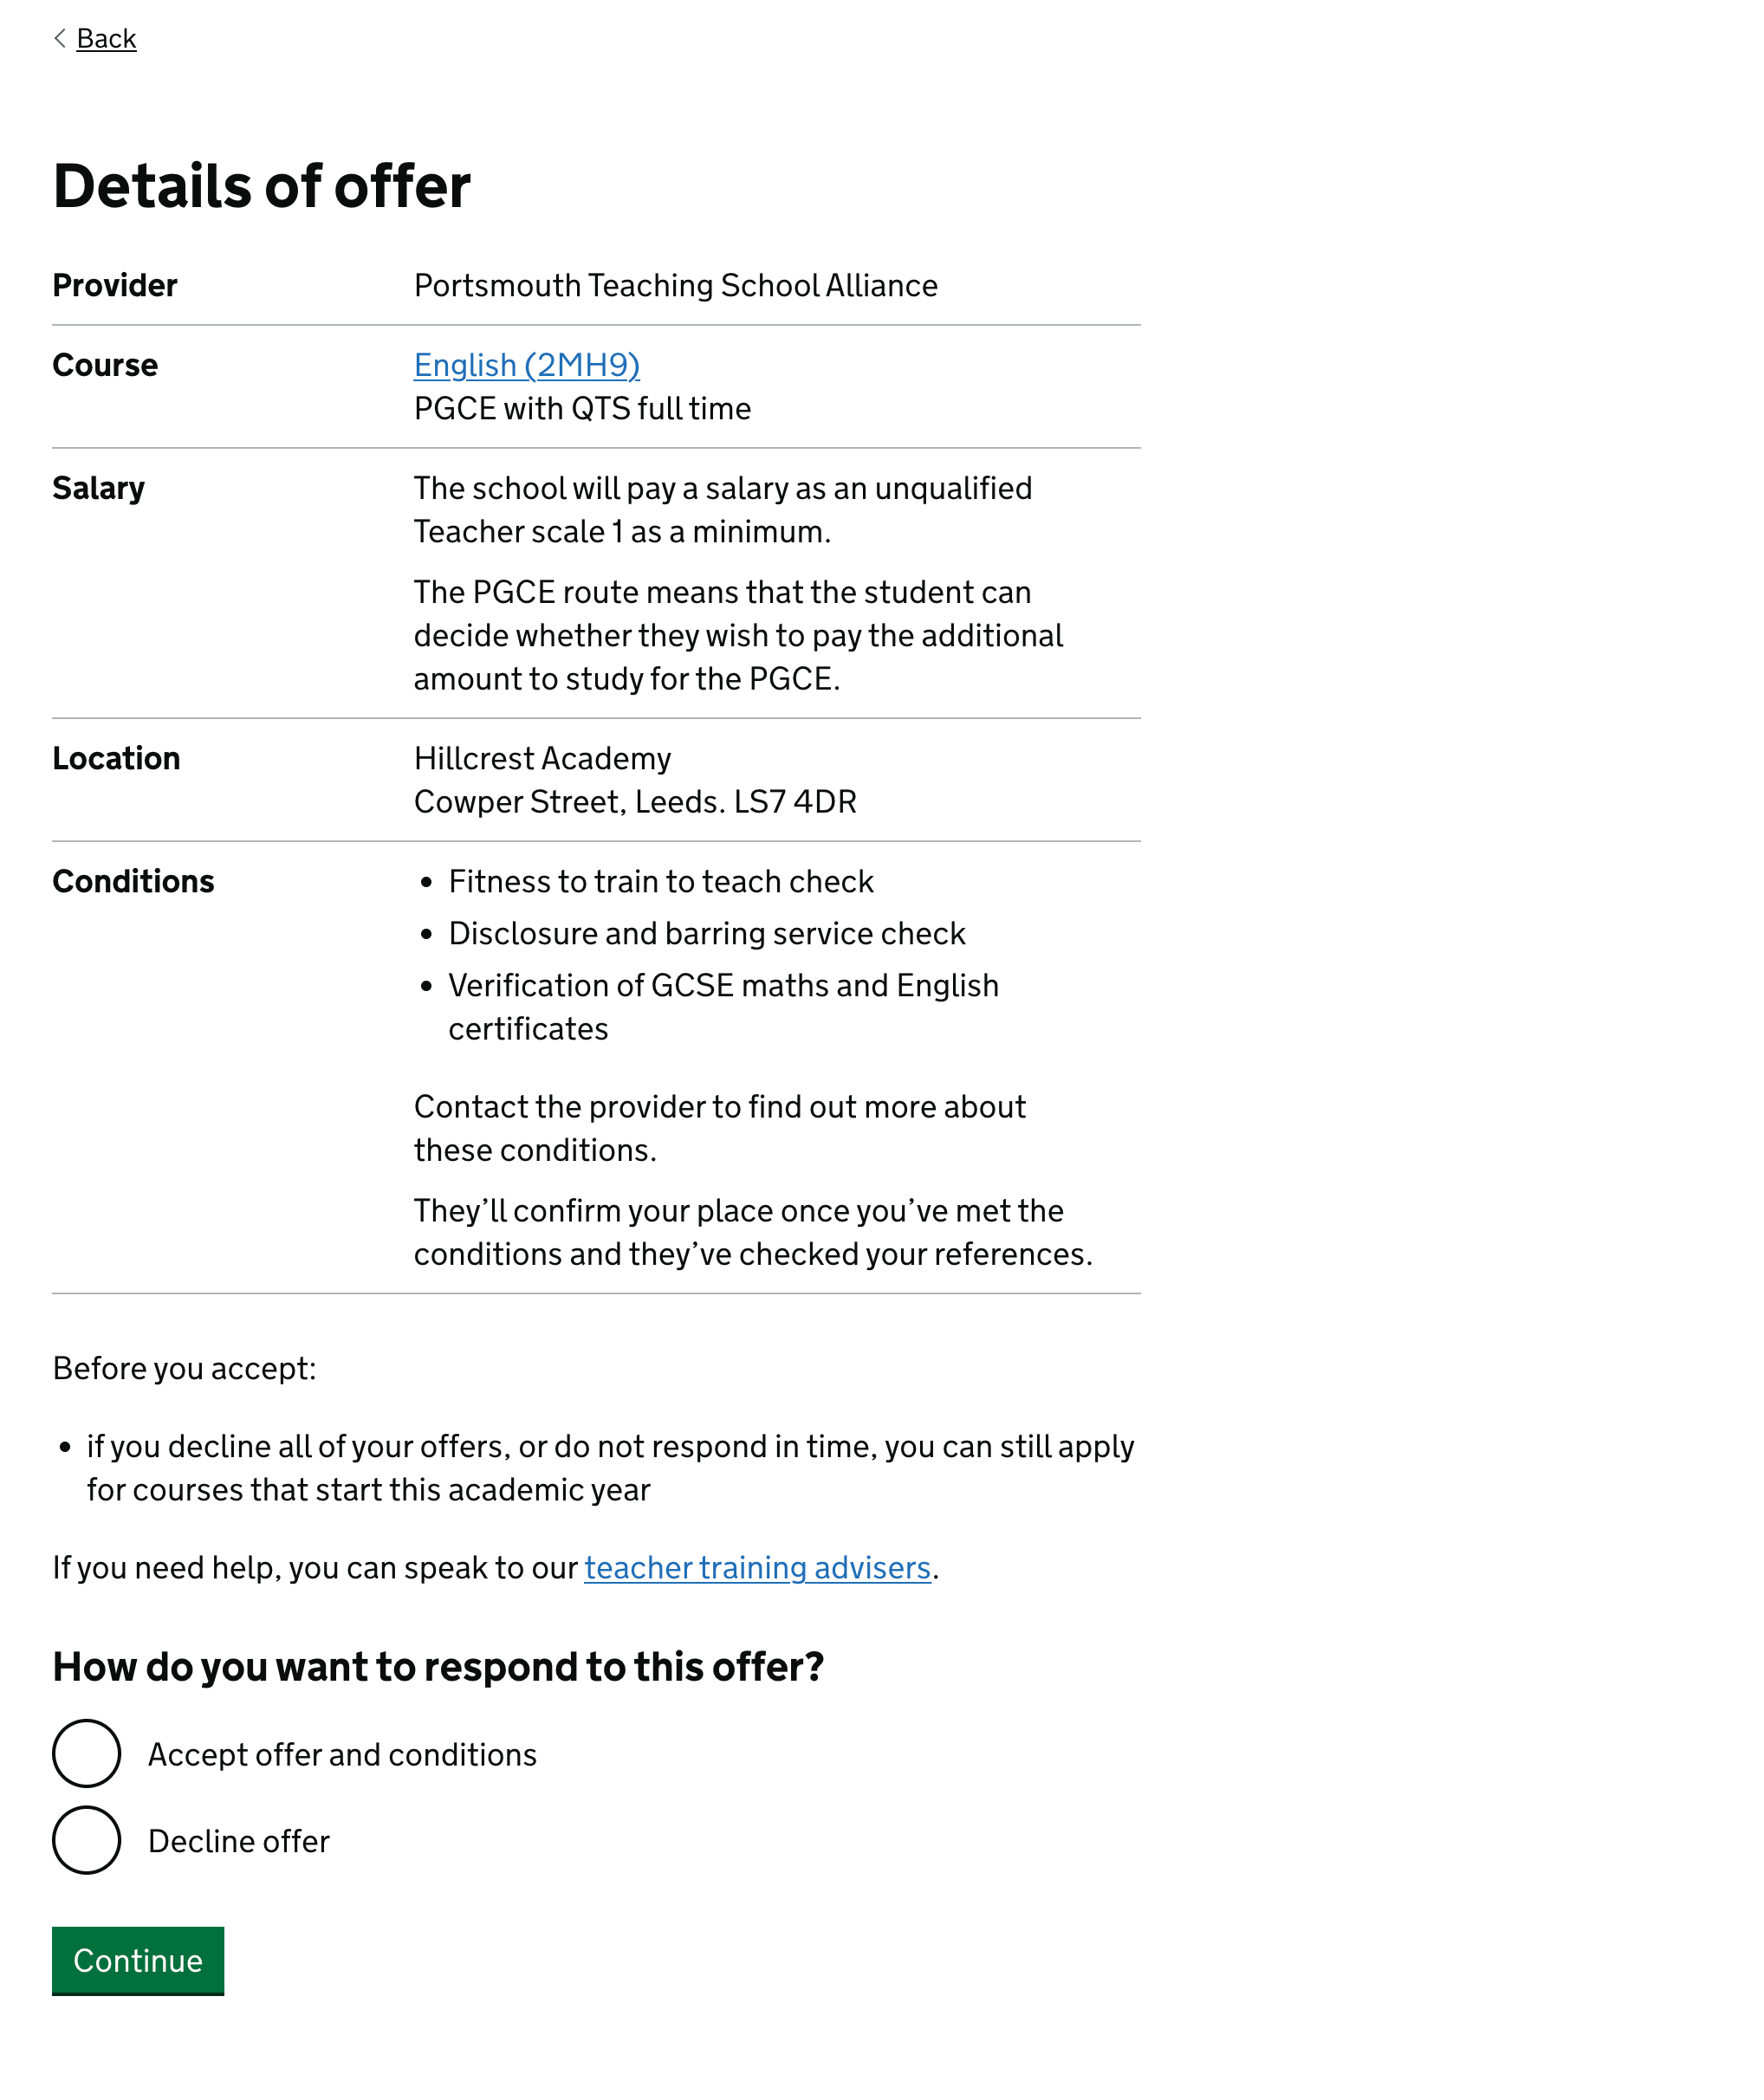 Screenshot showing page with the heading ‘Details of offer‘. There is a table showing the provider, course, salart, location and conditions for the offer. Under this is a note saying that if the candidate declines the offer or does not respond it time, they’ll be able to apply again. It also has a link to get help from a teacher training advisor. At the bottom of the page is the question ‘How do you want to respond to this offer?’ The options are ‘Accept offer and conditions’ or ‘Decline offer’. There's a green button to let the candidate continue after choosing an option.